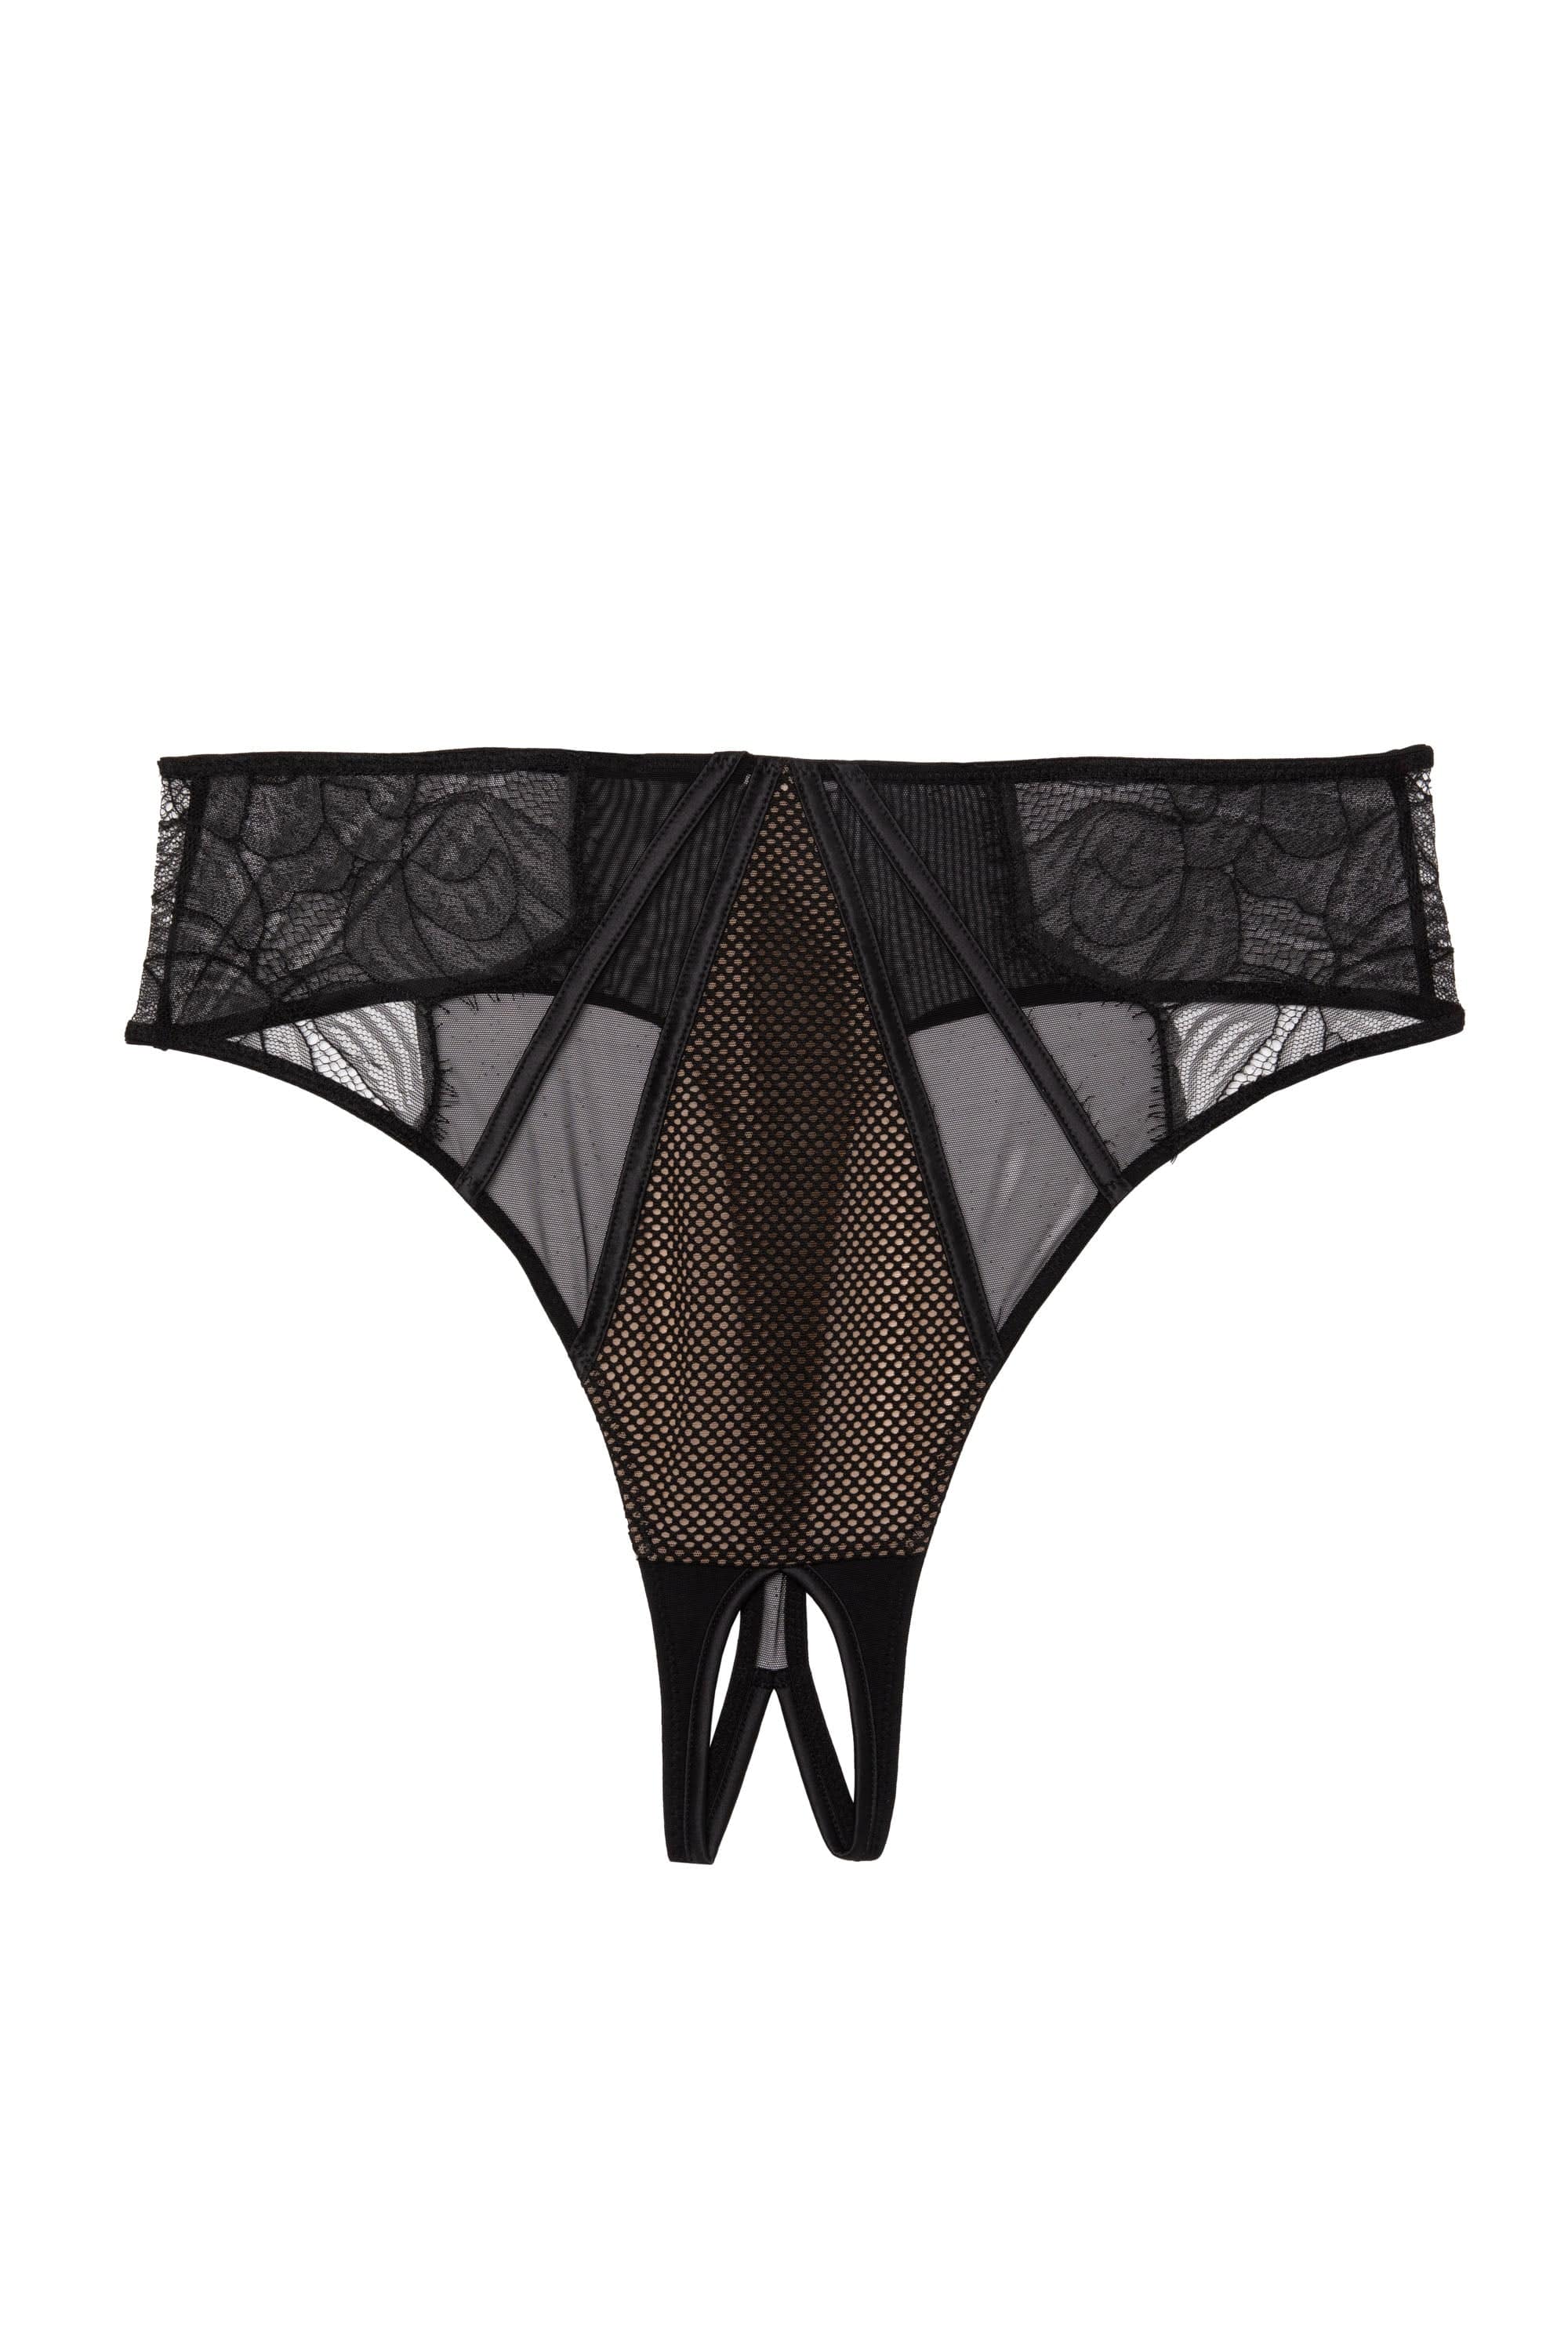 Fairfield Black Fishnet And Lace Crotchless High Waist Thong